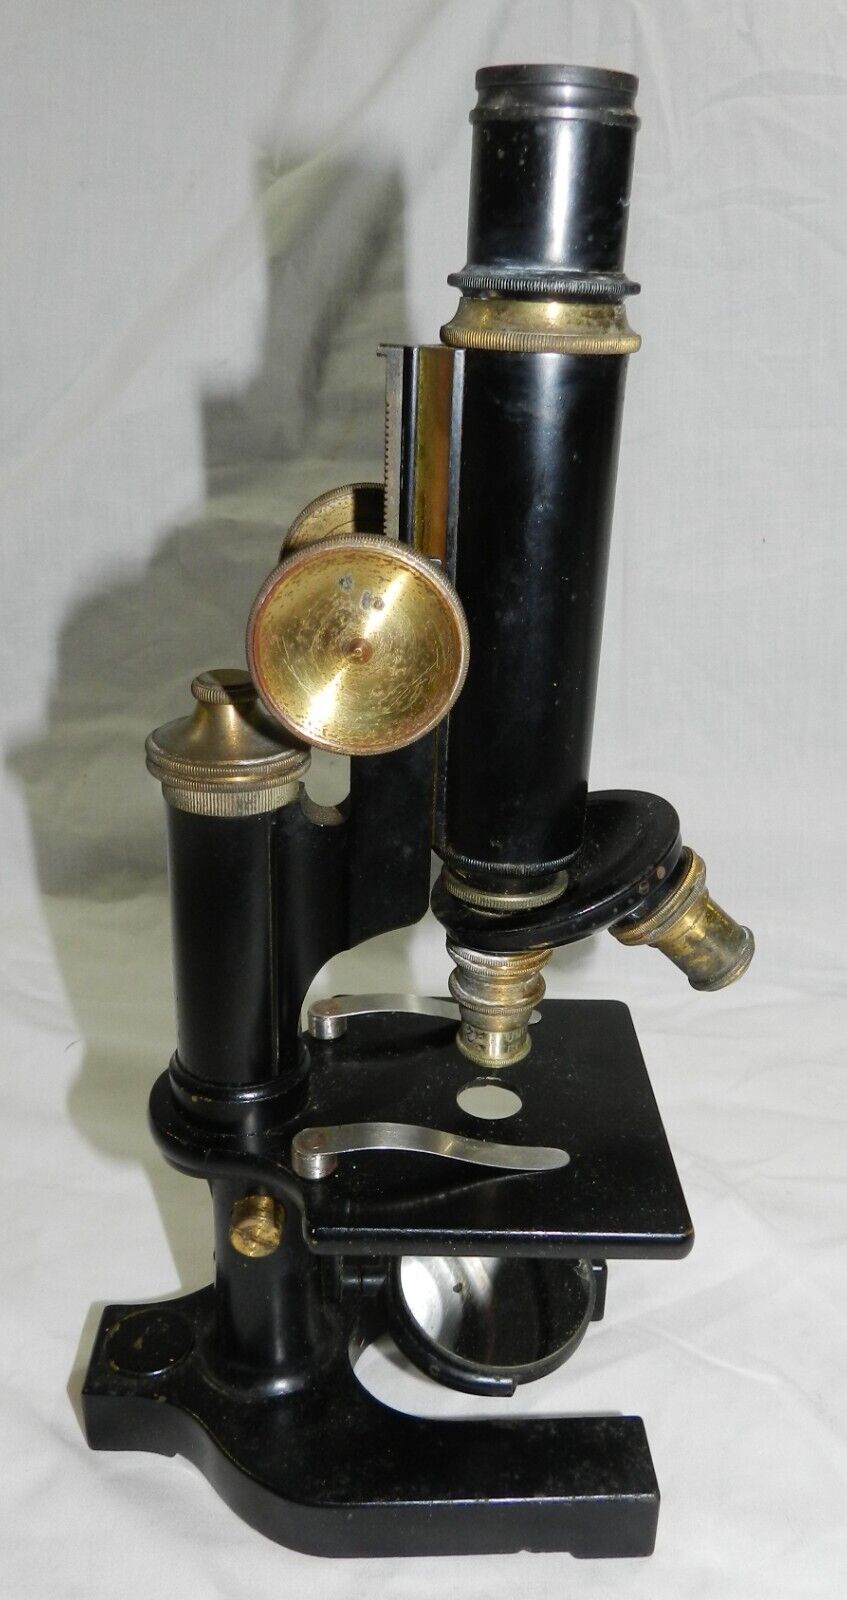 Vintage Bausch & Lomb Microscope with 2 objective lenses